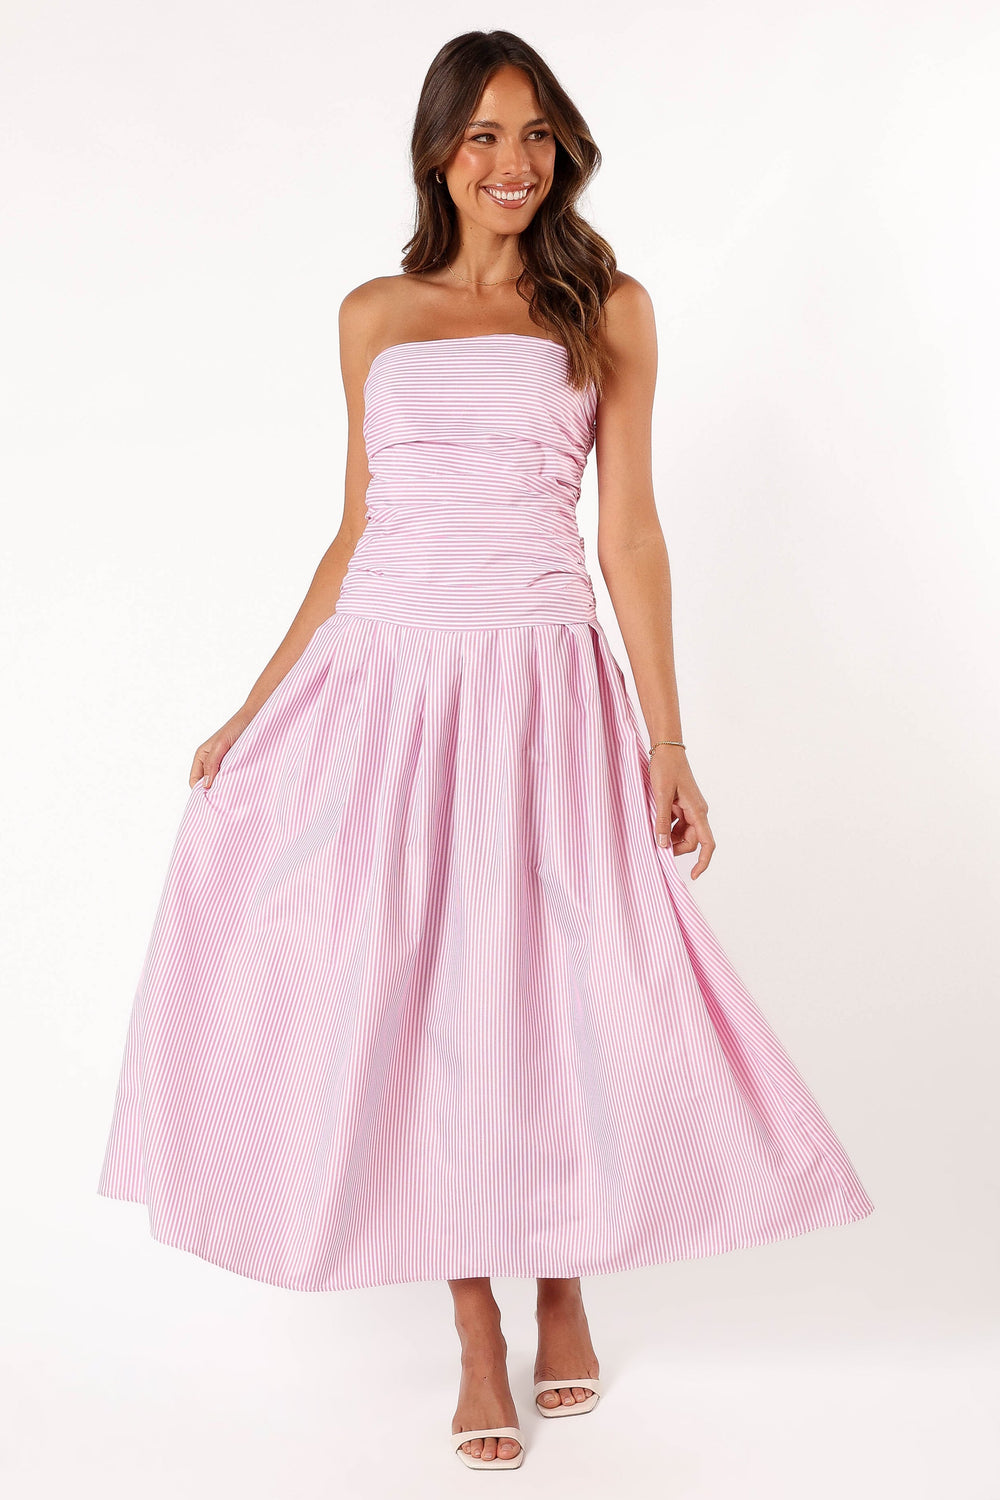 DRESSES @Avalee Strapless Maxi Dress - Pink Stripe (Hold for Transitional Essentials)